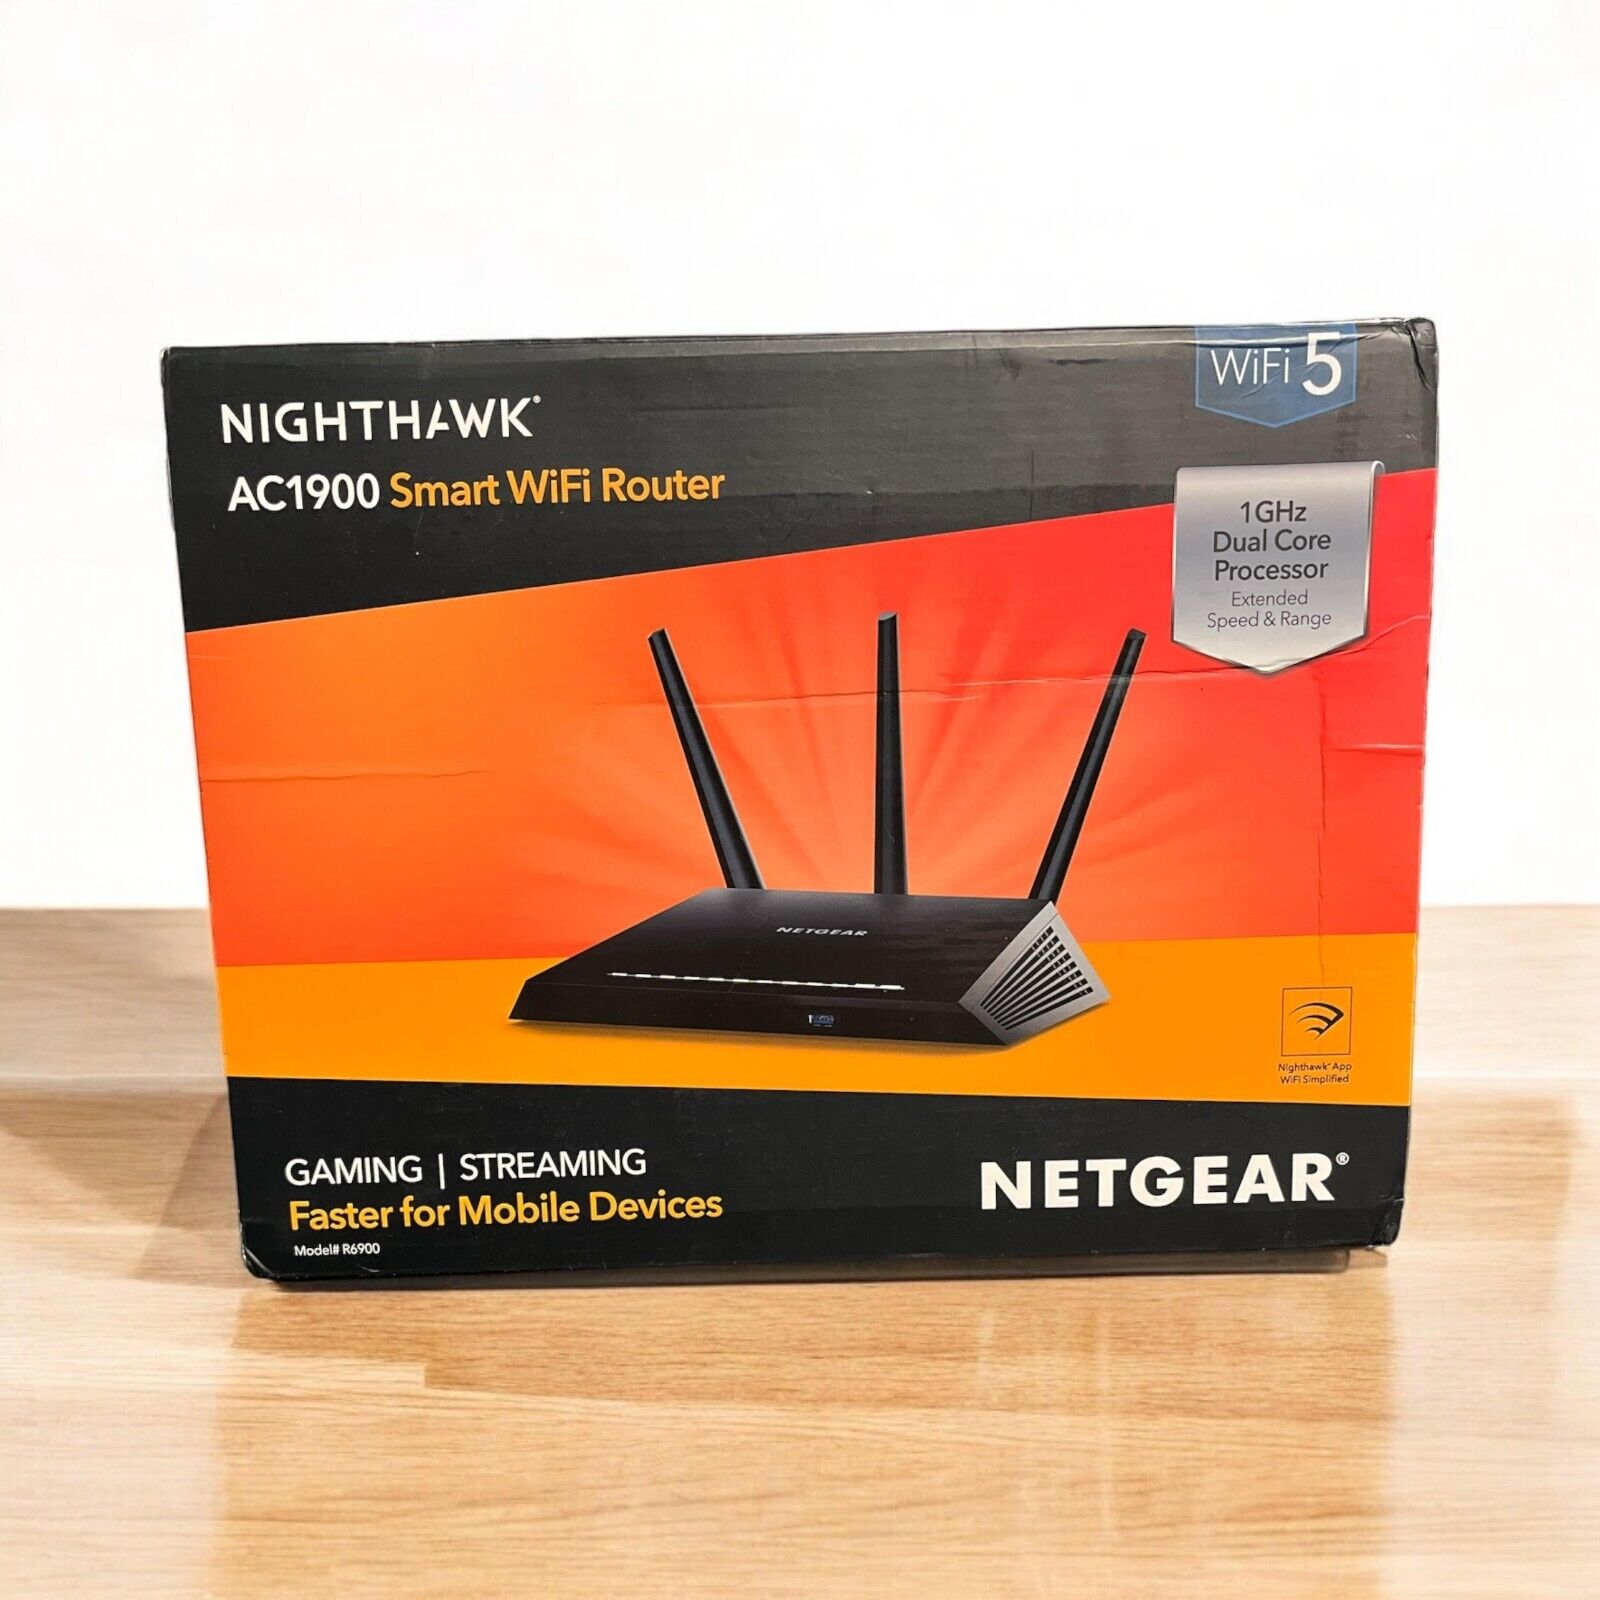 ✨ NETGEAR R6900 Nighthawk AC1900 Smart WiFi Router NEW  for Gaming / Streaming ✨